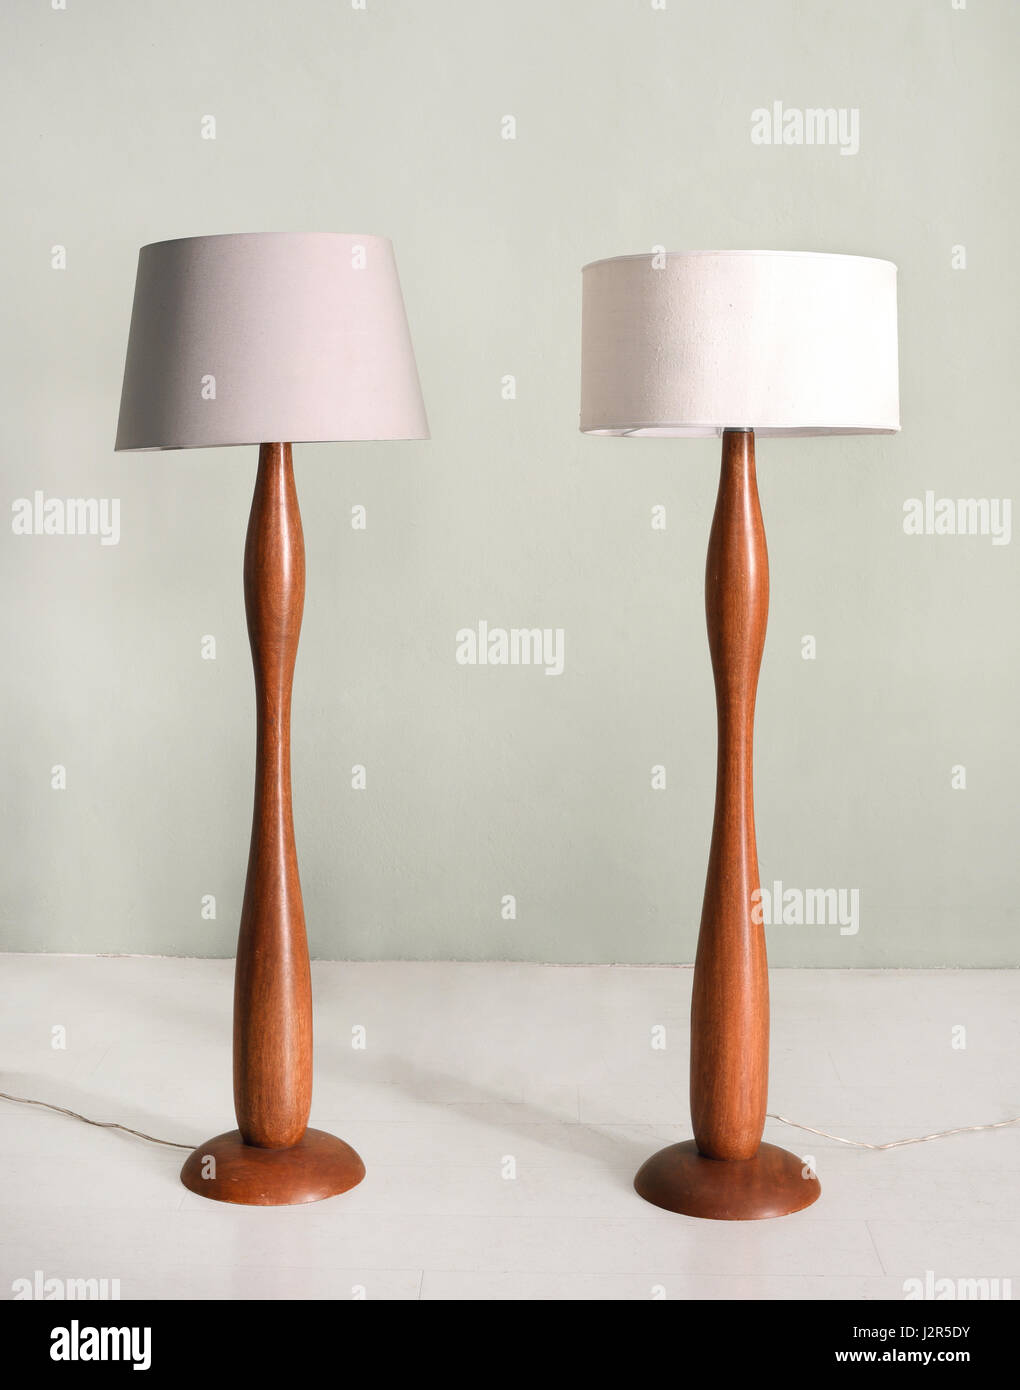 Pair of wooden floor or standing lamps with a curving sinuous shape and neutral colored cylindrical lampshades in a decor and design concept Stock Photo